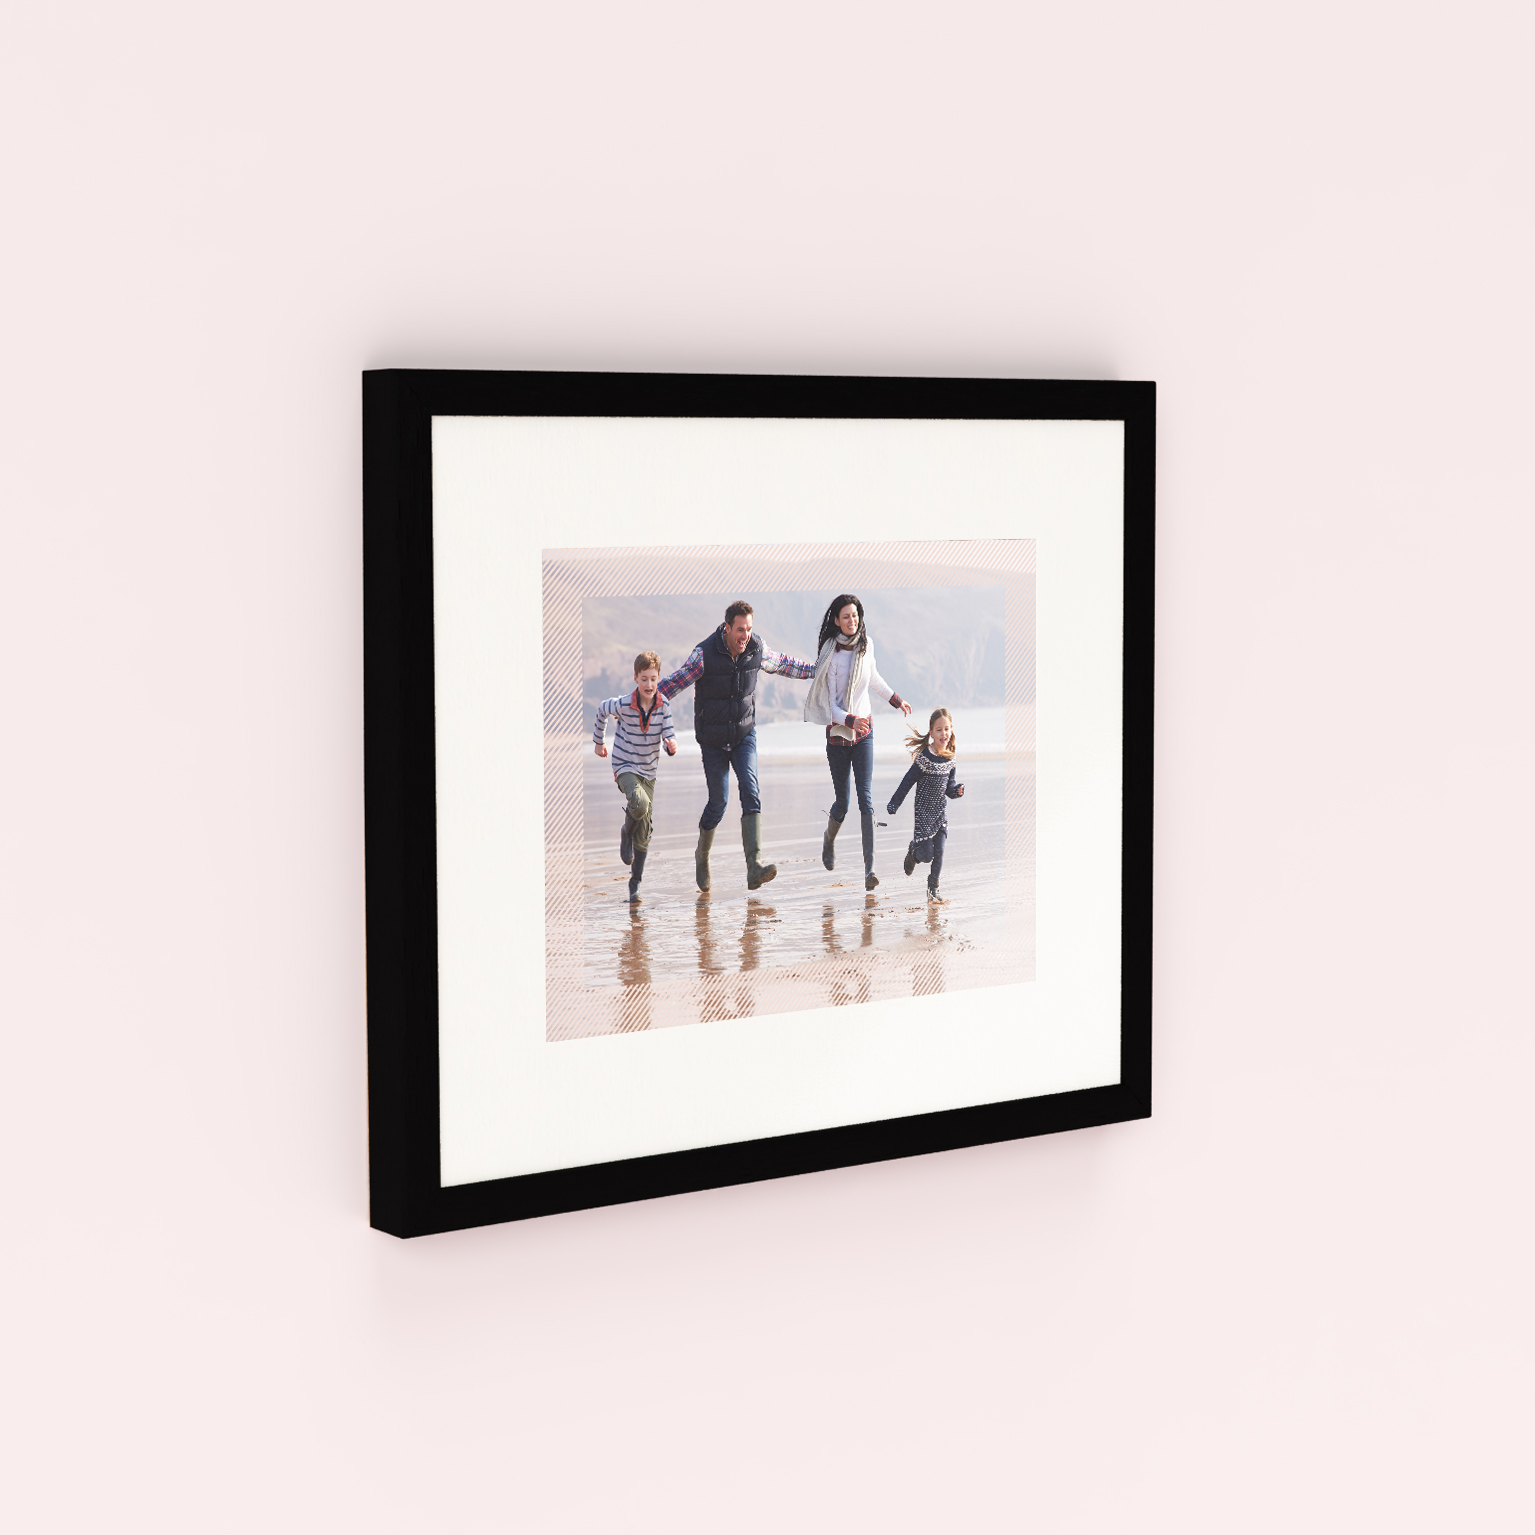 Diagonals Framed Photo Print - Discover a captivating design, perfect for personalizing a bespoke keepsake.